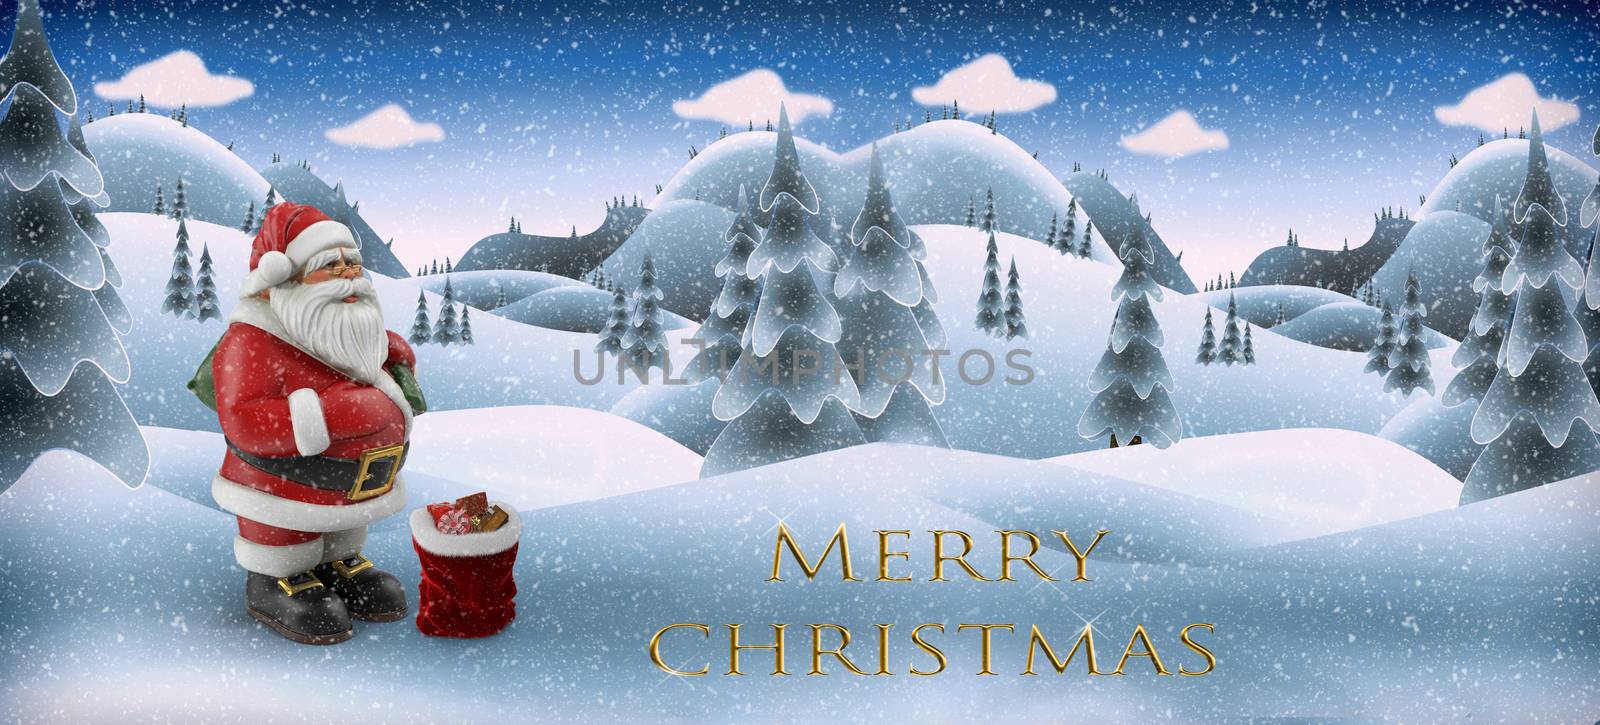 Beautiful Christmas card with Santa Claus and gifts. by georgina198